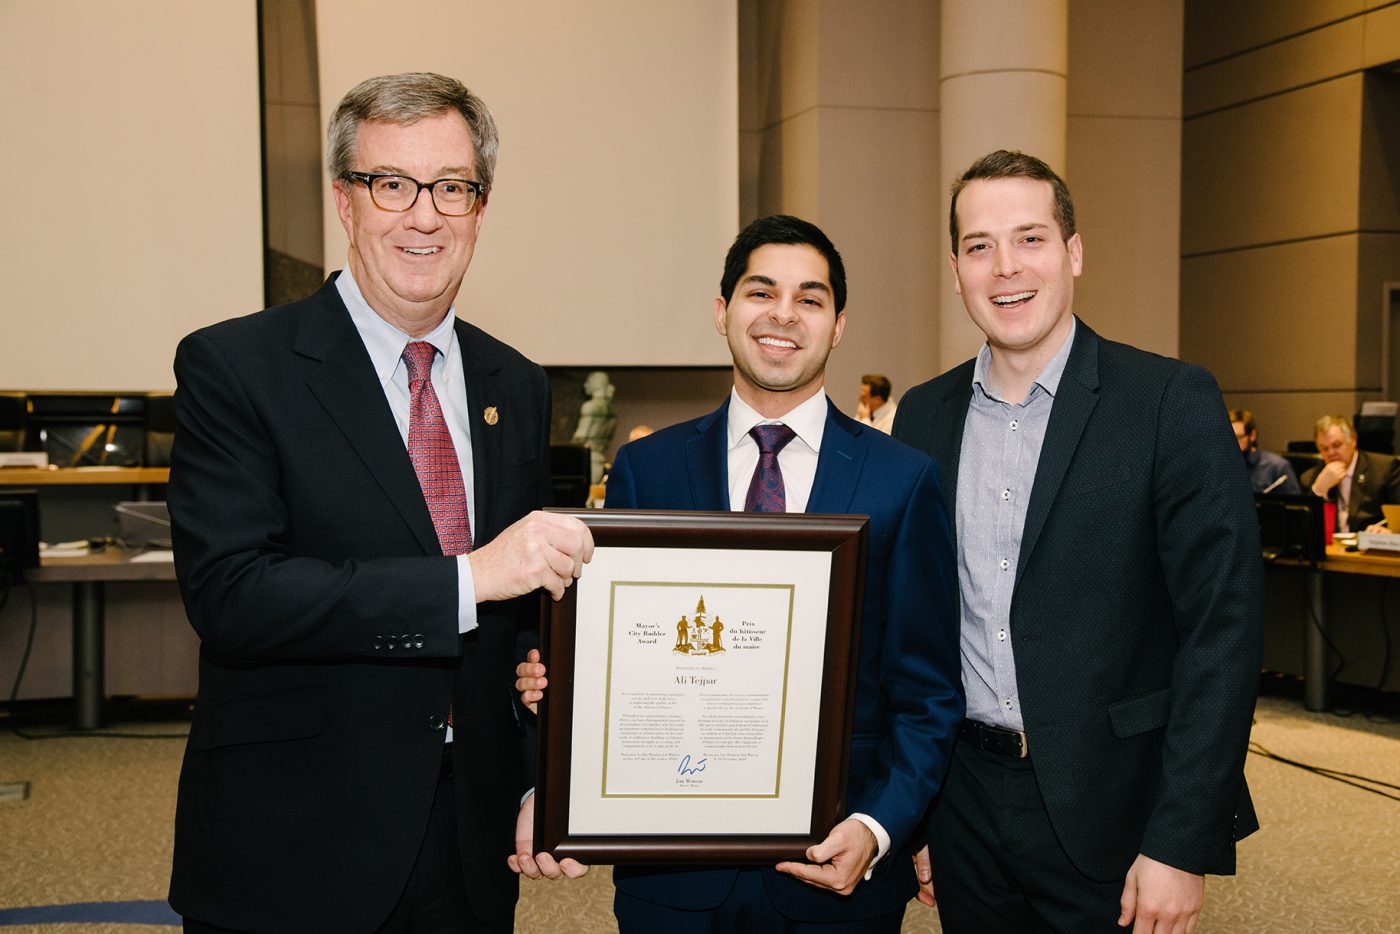 Ali Tejpar holds a certificate with Jim Watson and Mathieu Fleury on either side of him.